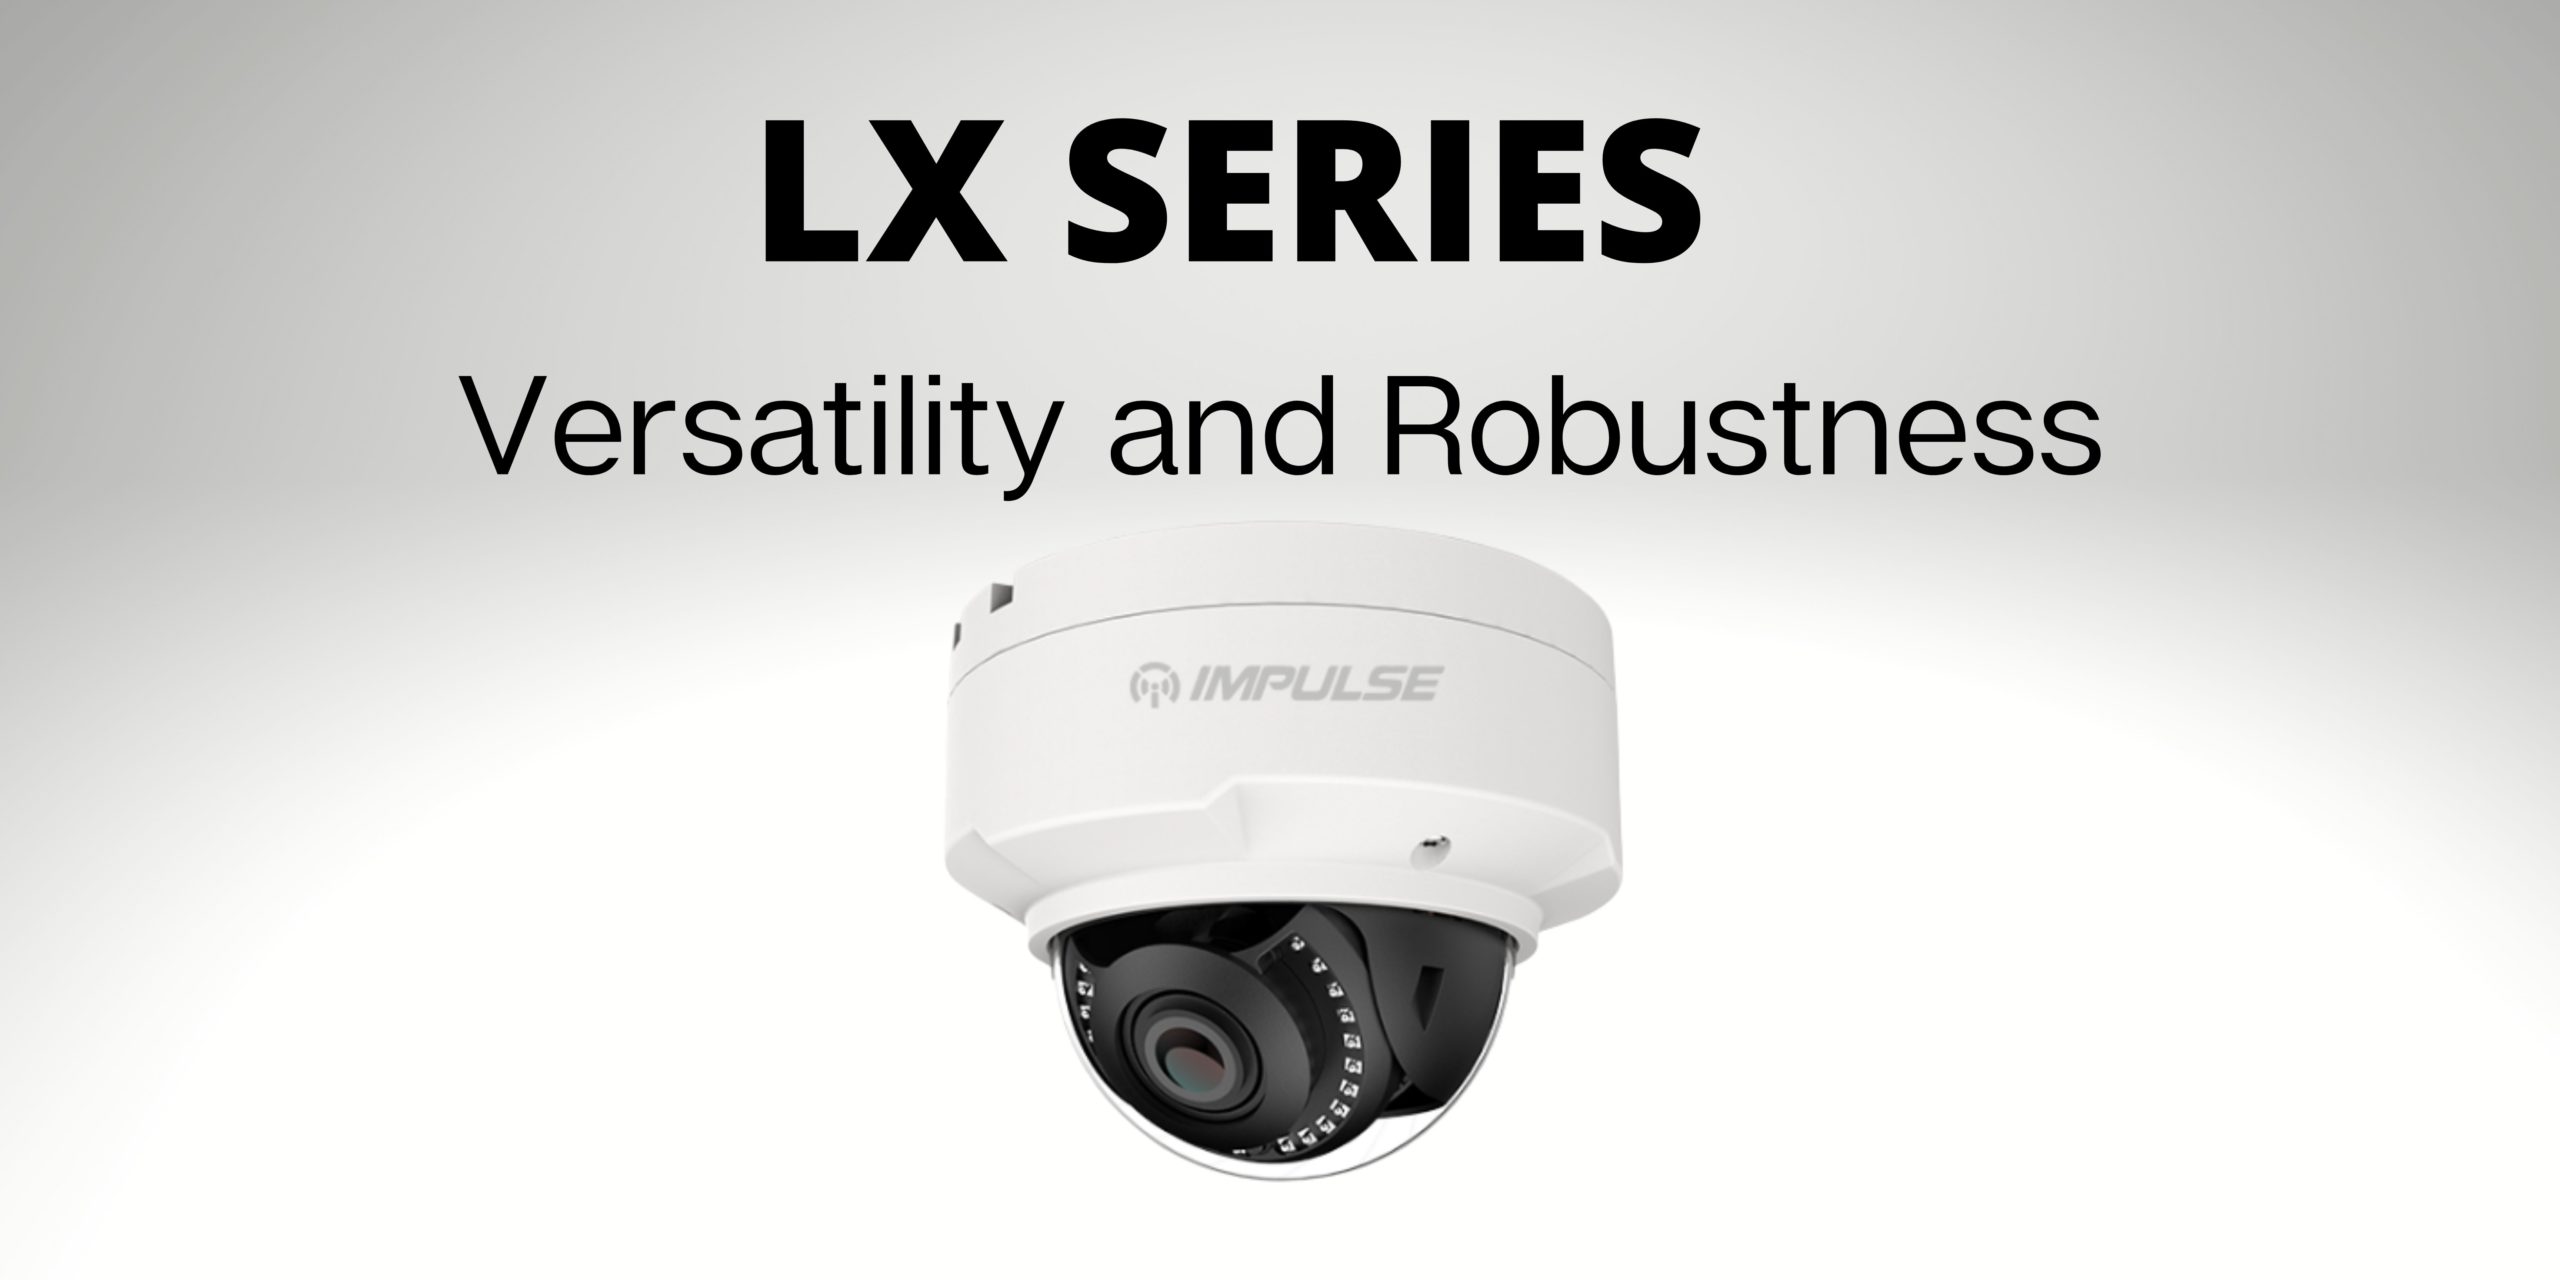 Impulse CCTV & PoE Switching l LX Series Dome - Versatility and Robustness